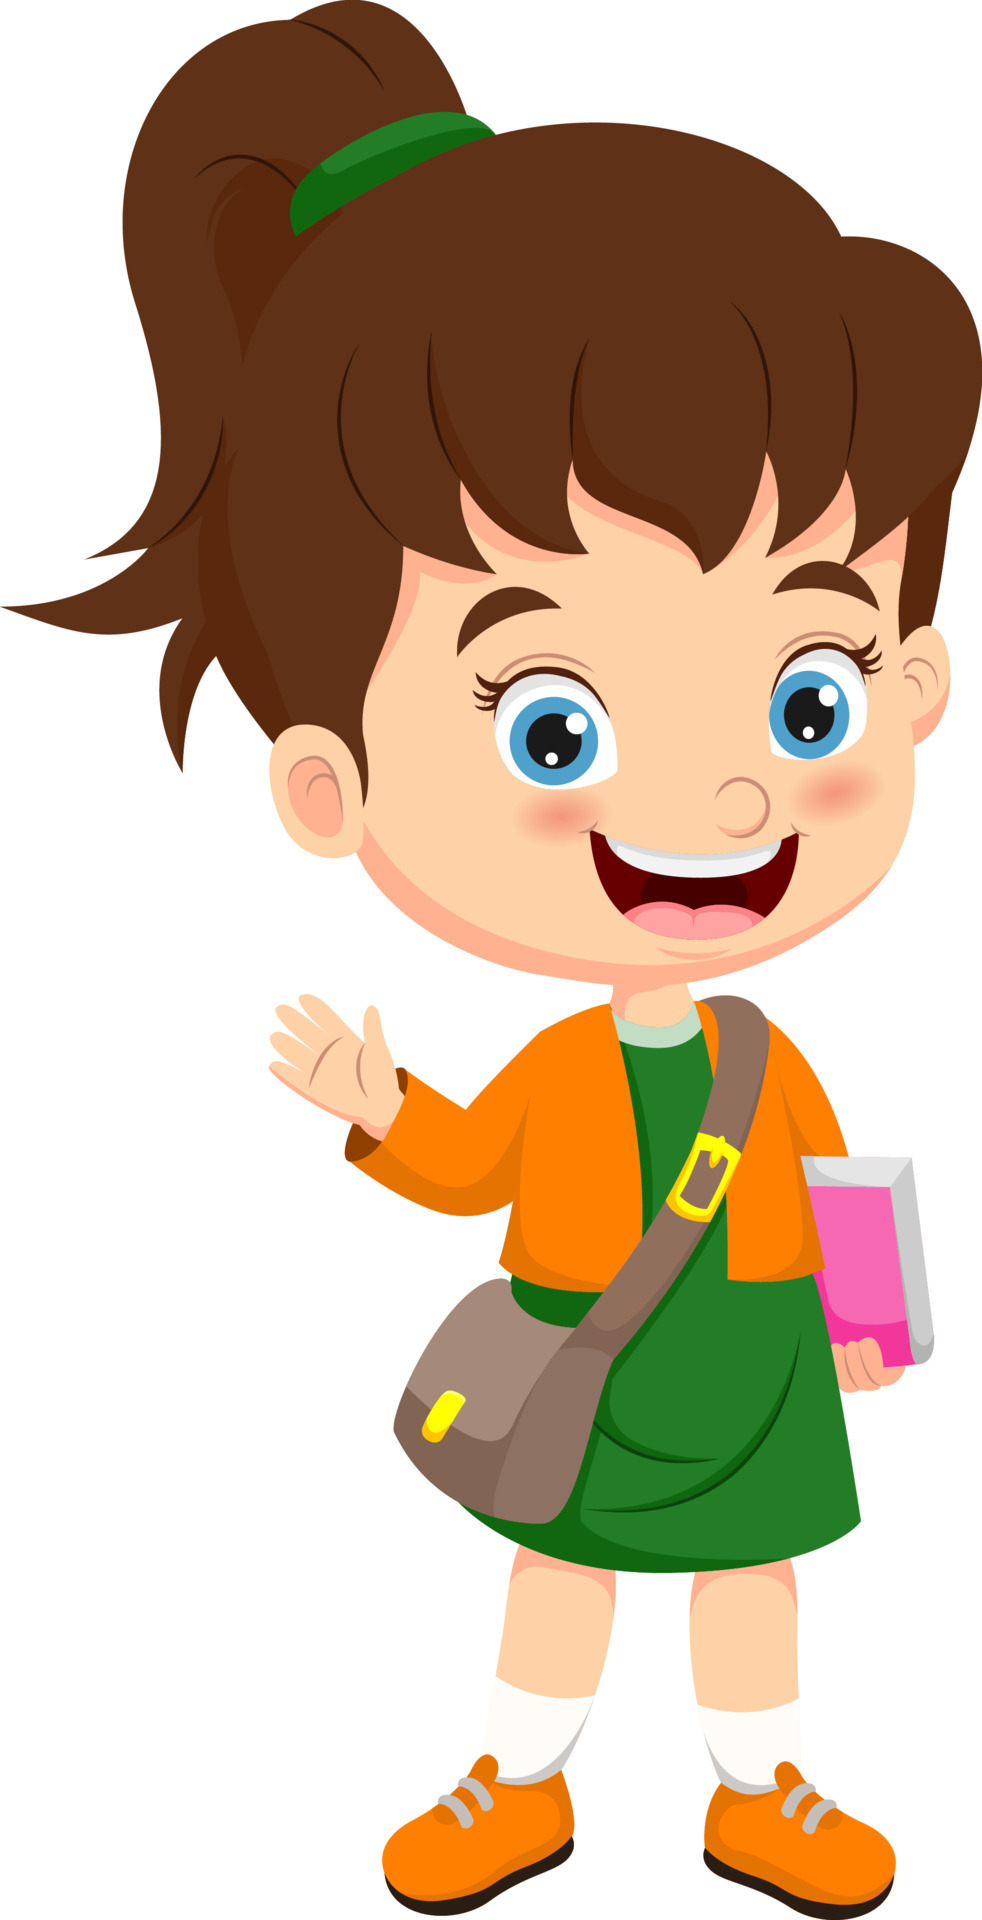 Girl Cartoon Vector Art, Icons, and Graphics for Free Download